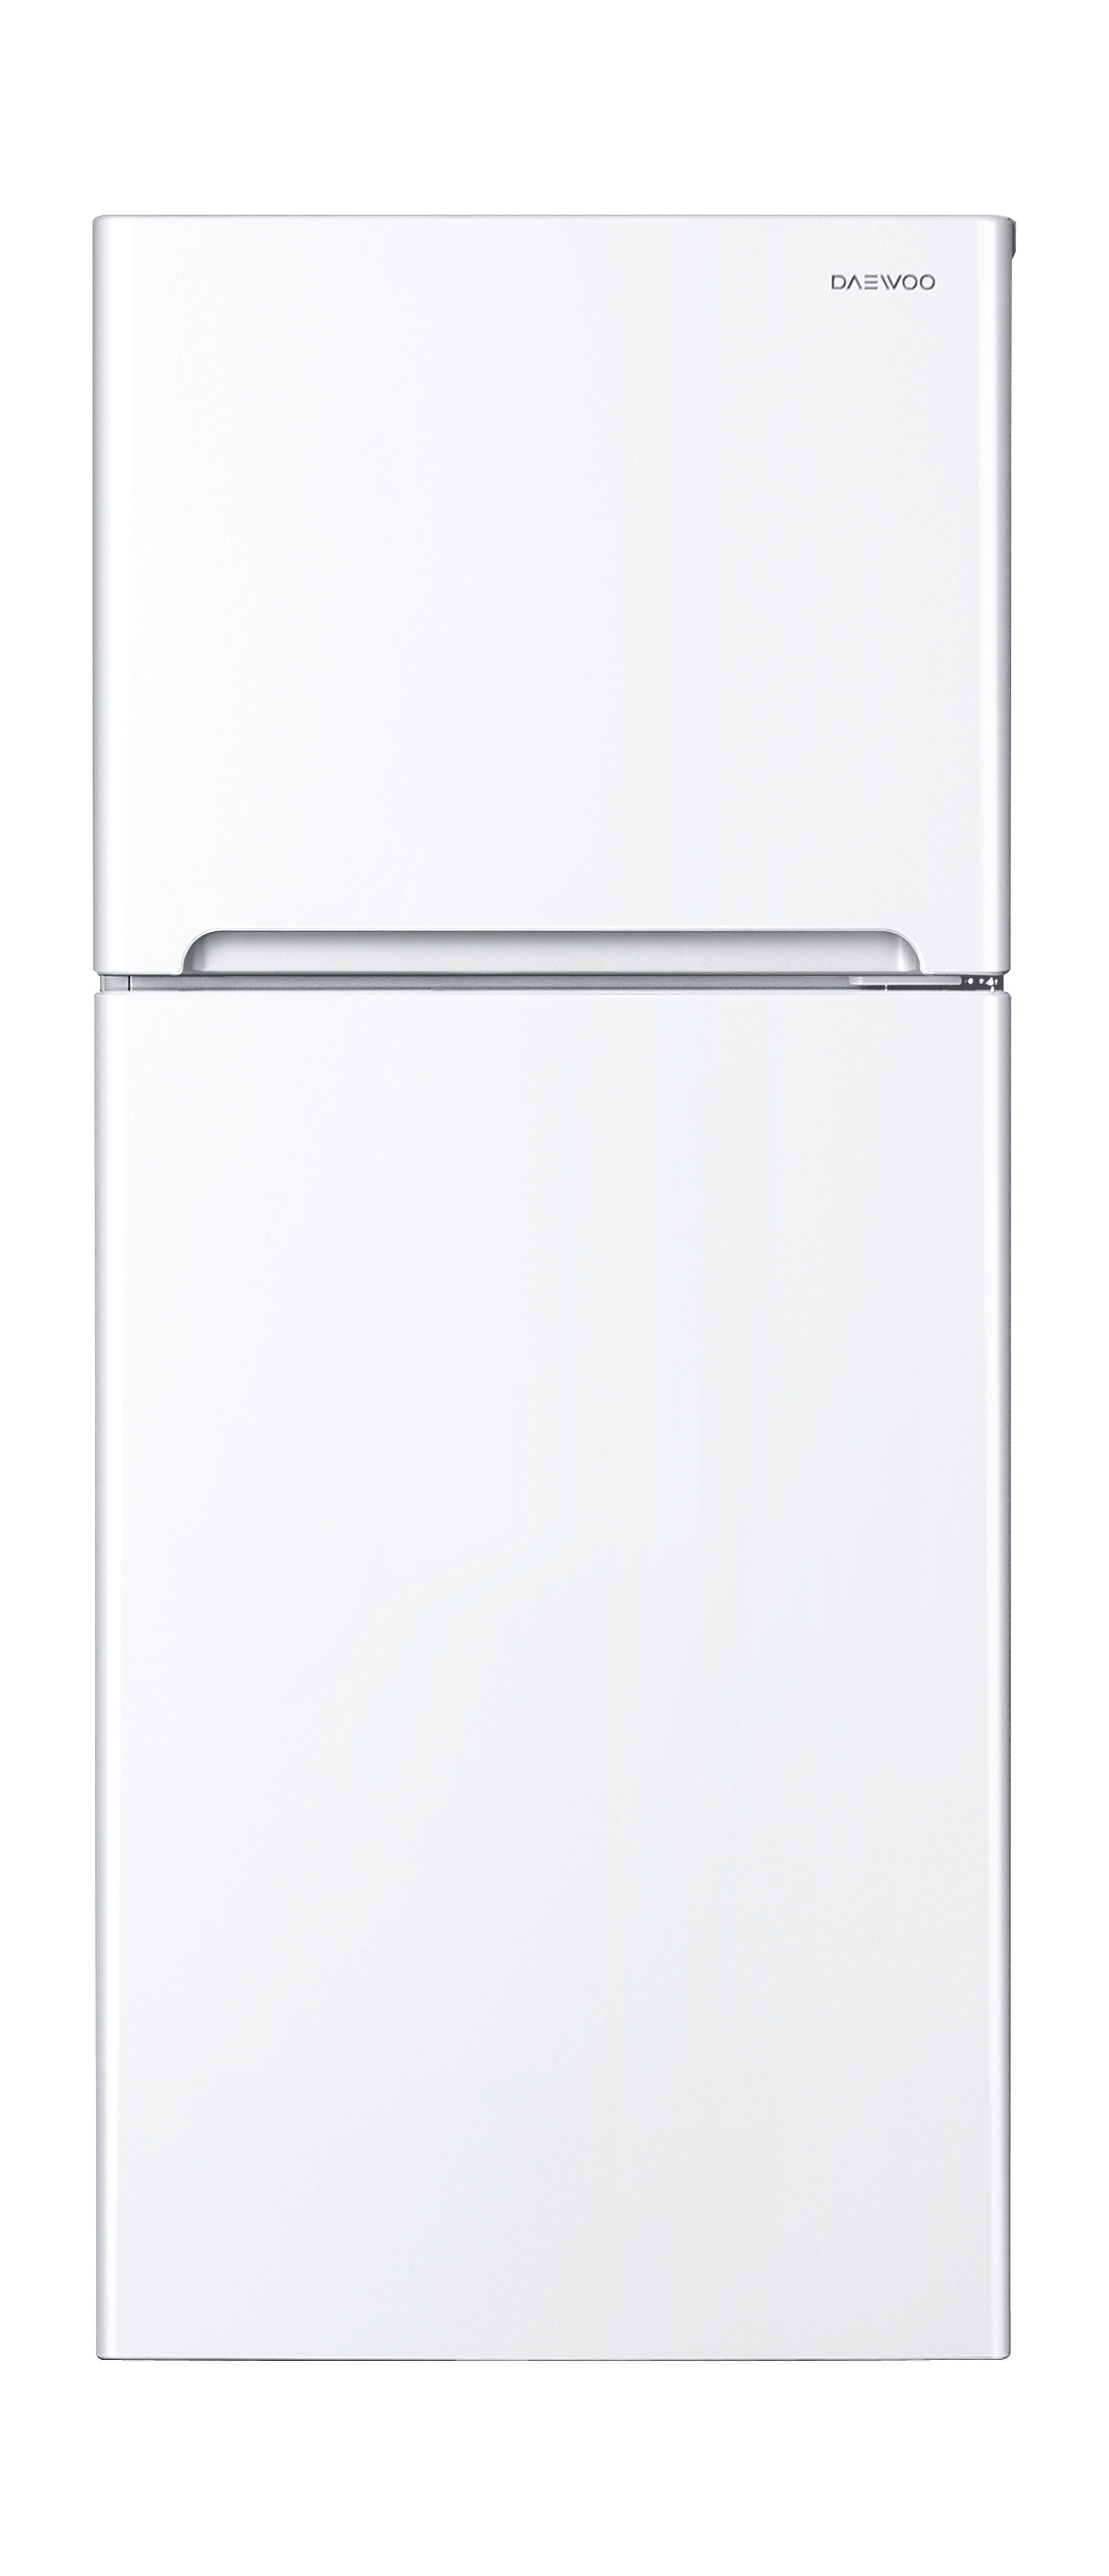 Buy Daewoo 14 cft. Top mount refrigerator (fng406nt) - white in Kuwait